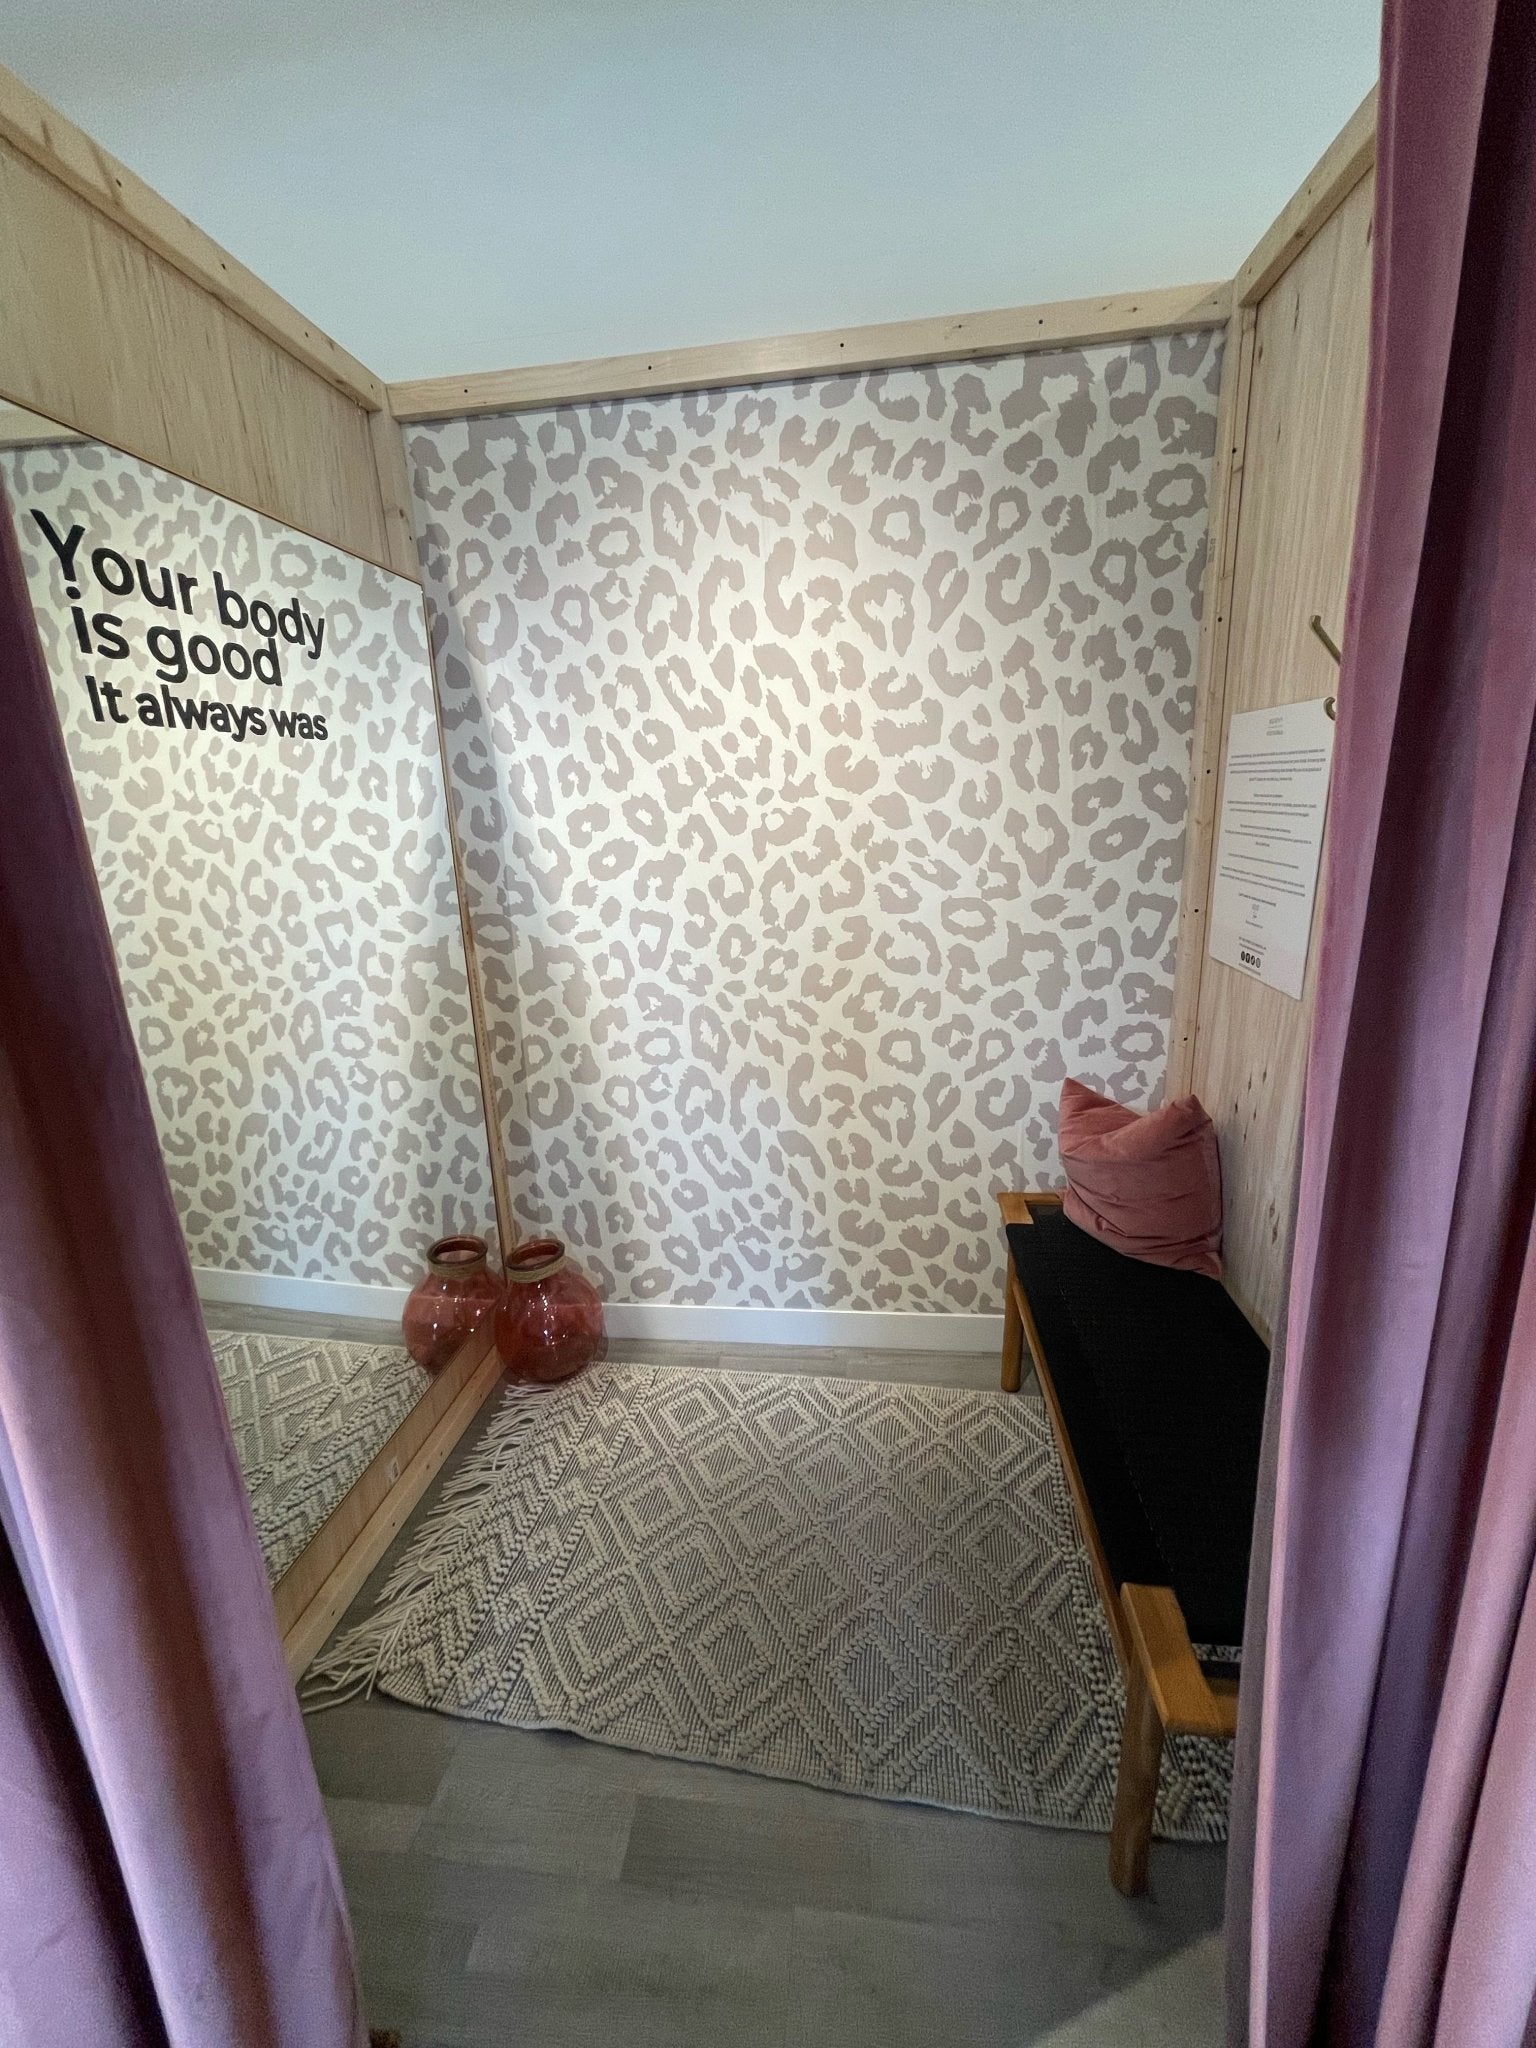 Clothing store change room with a neutral animal print wallpaper feature wall, large mirror and dusty rose curtains.